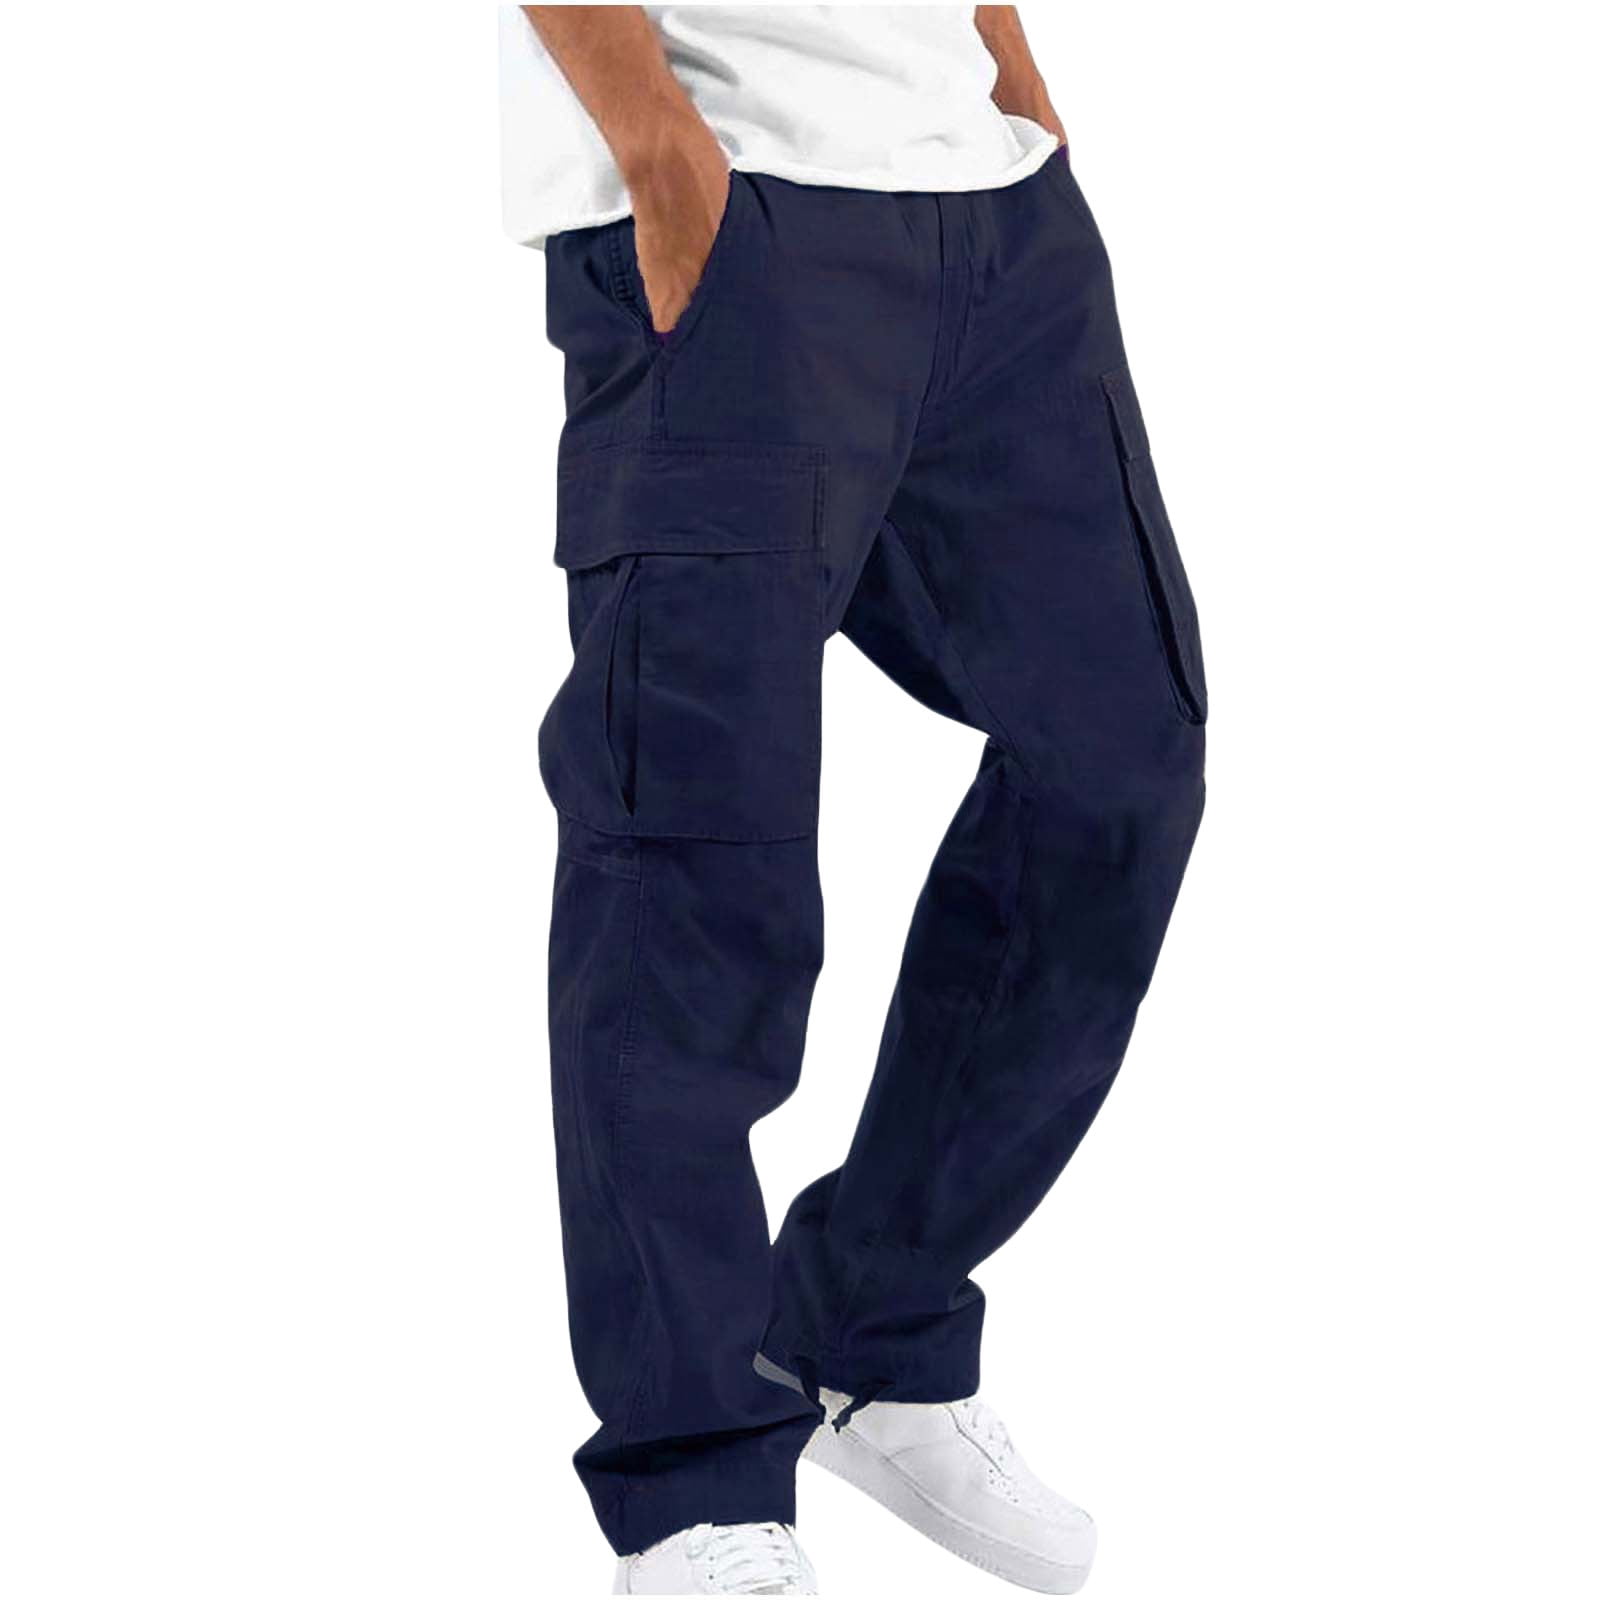 Buy Men's Beige Cargo Joggers Pants For Gym And Sports – AestheticNation